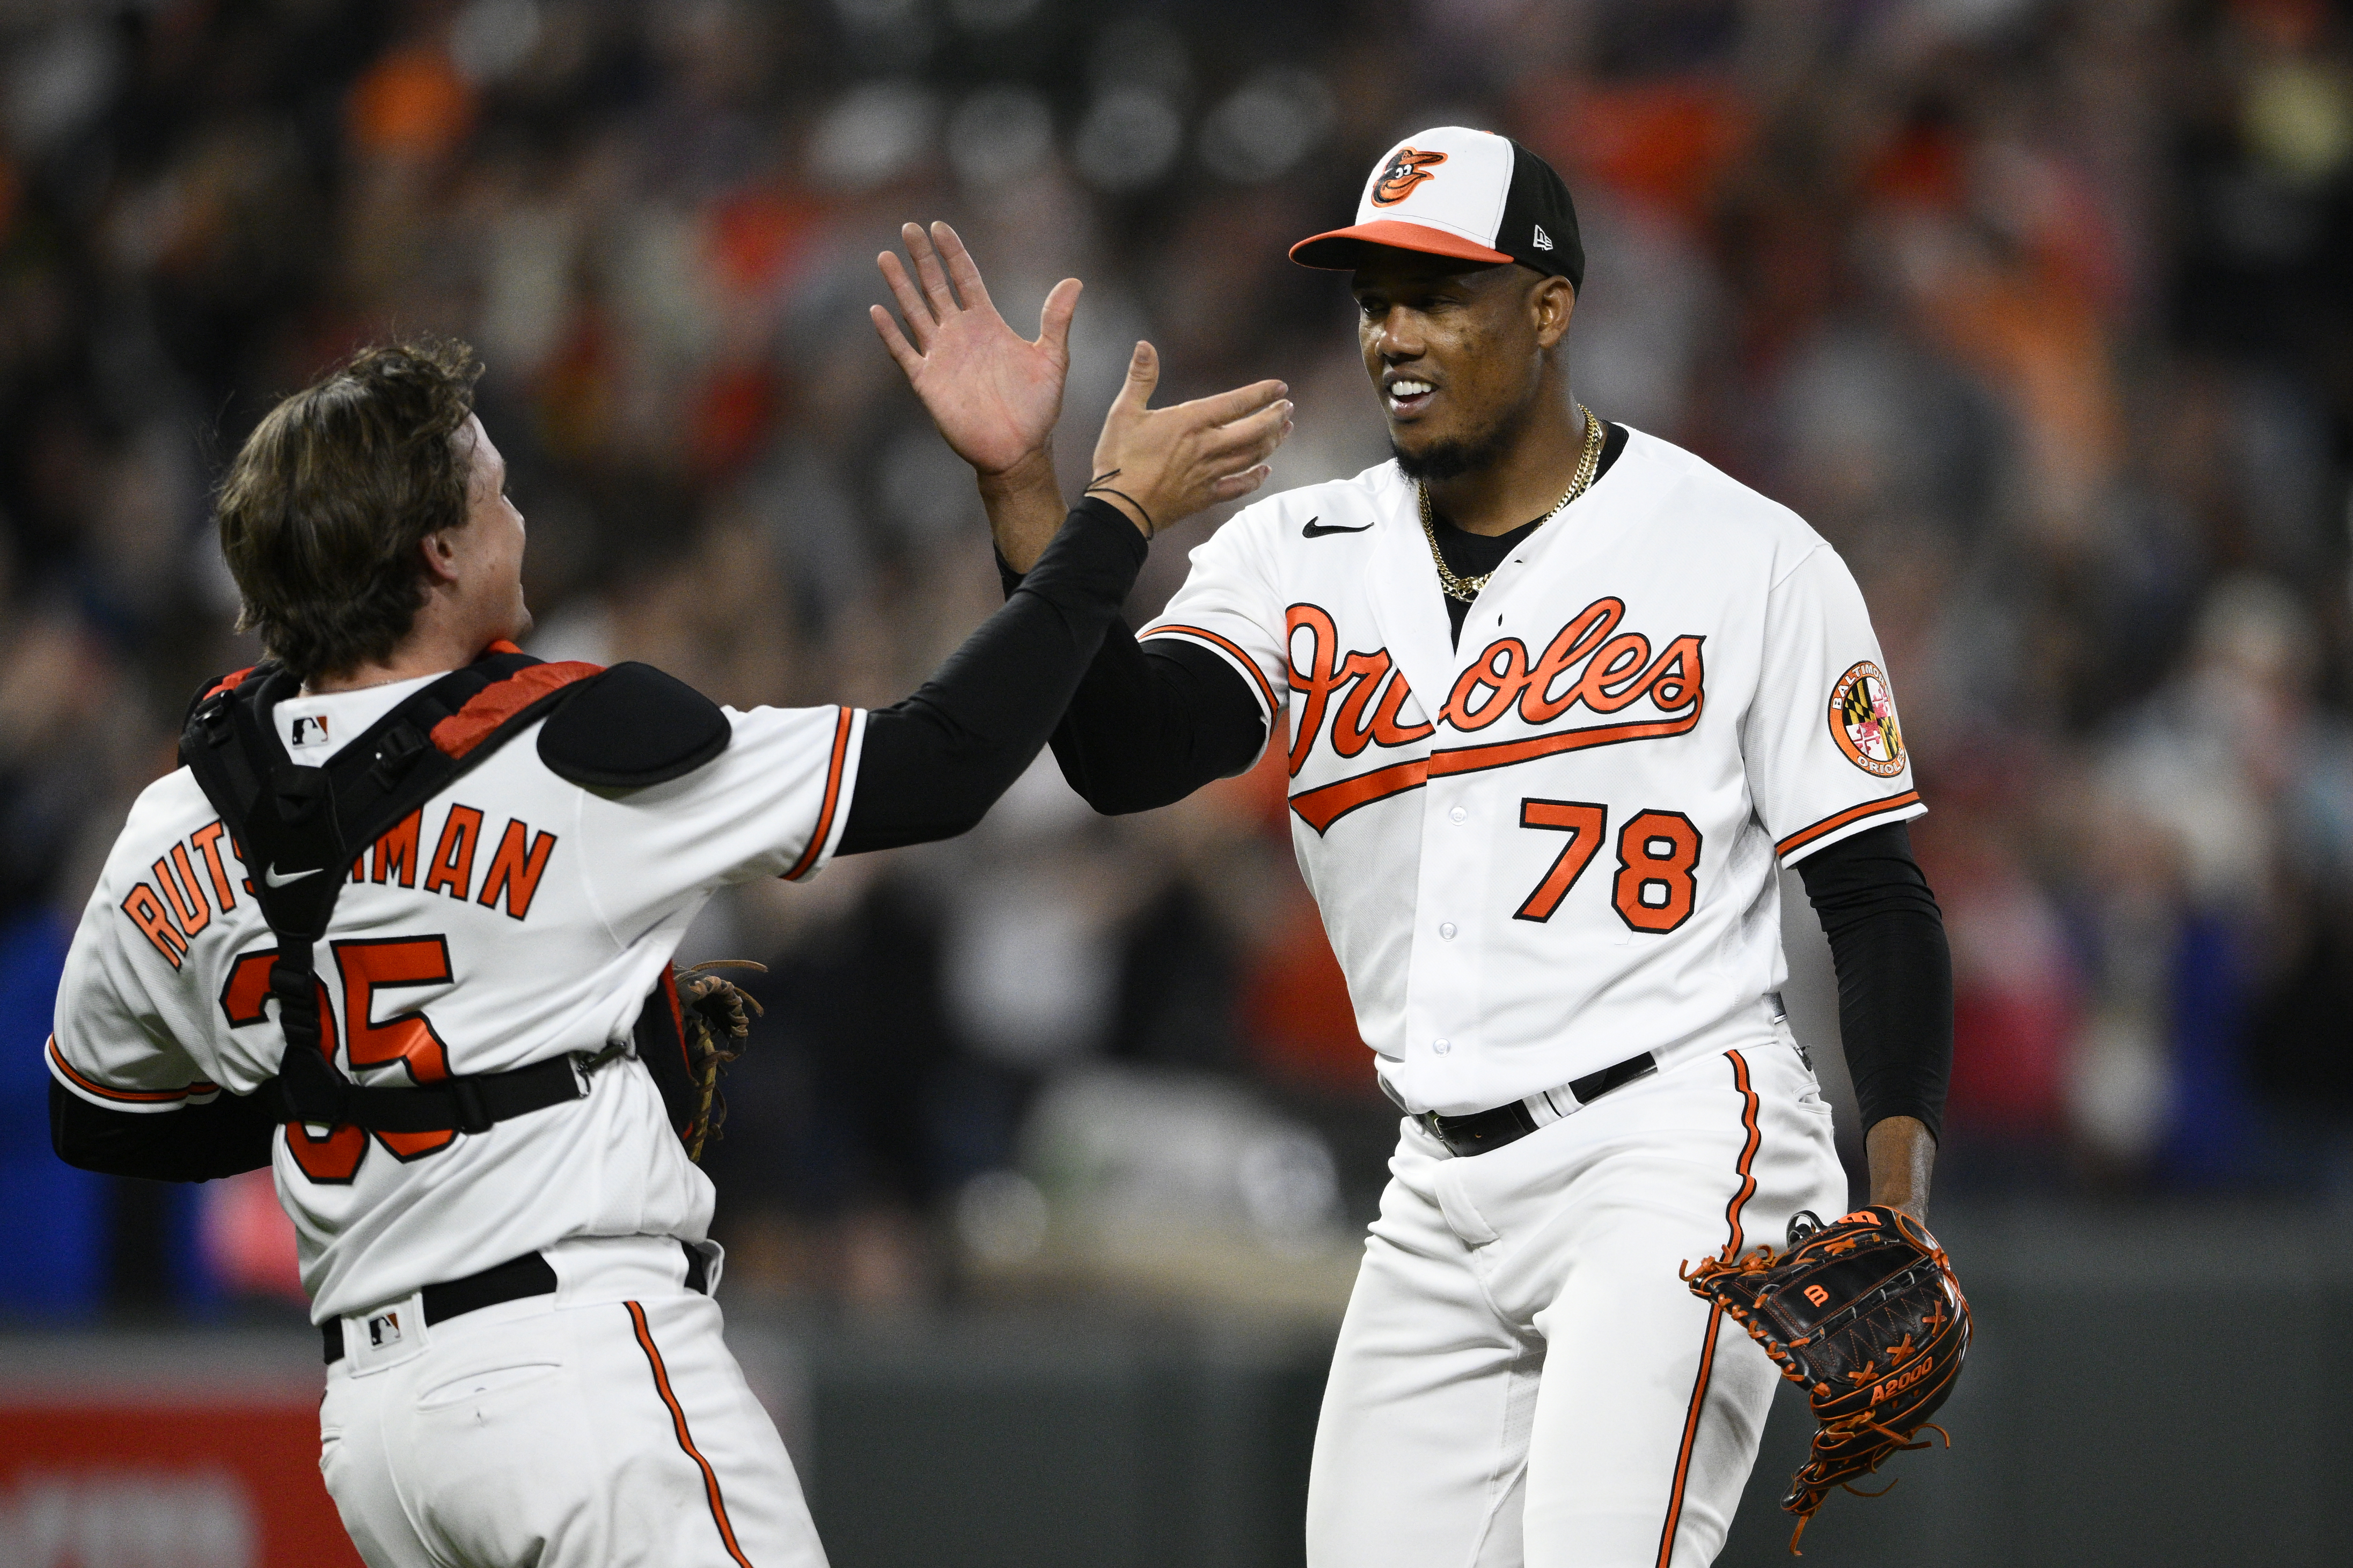 Orioles news: The wild card grind continues for the Orioles - Camden Chat